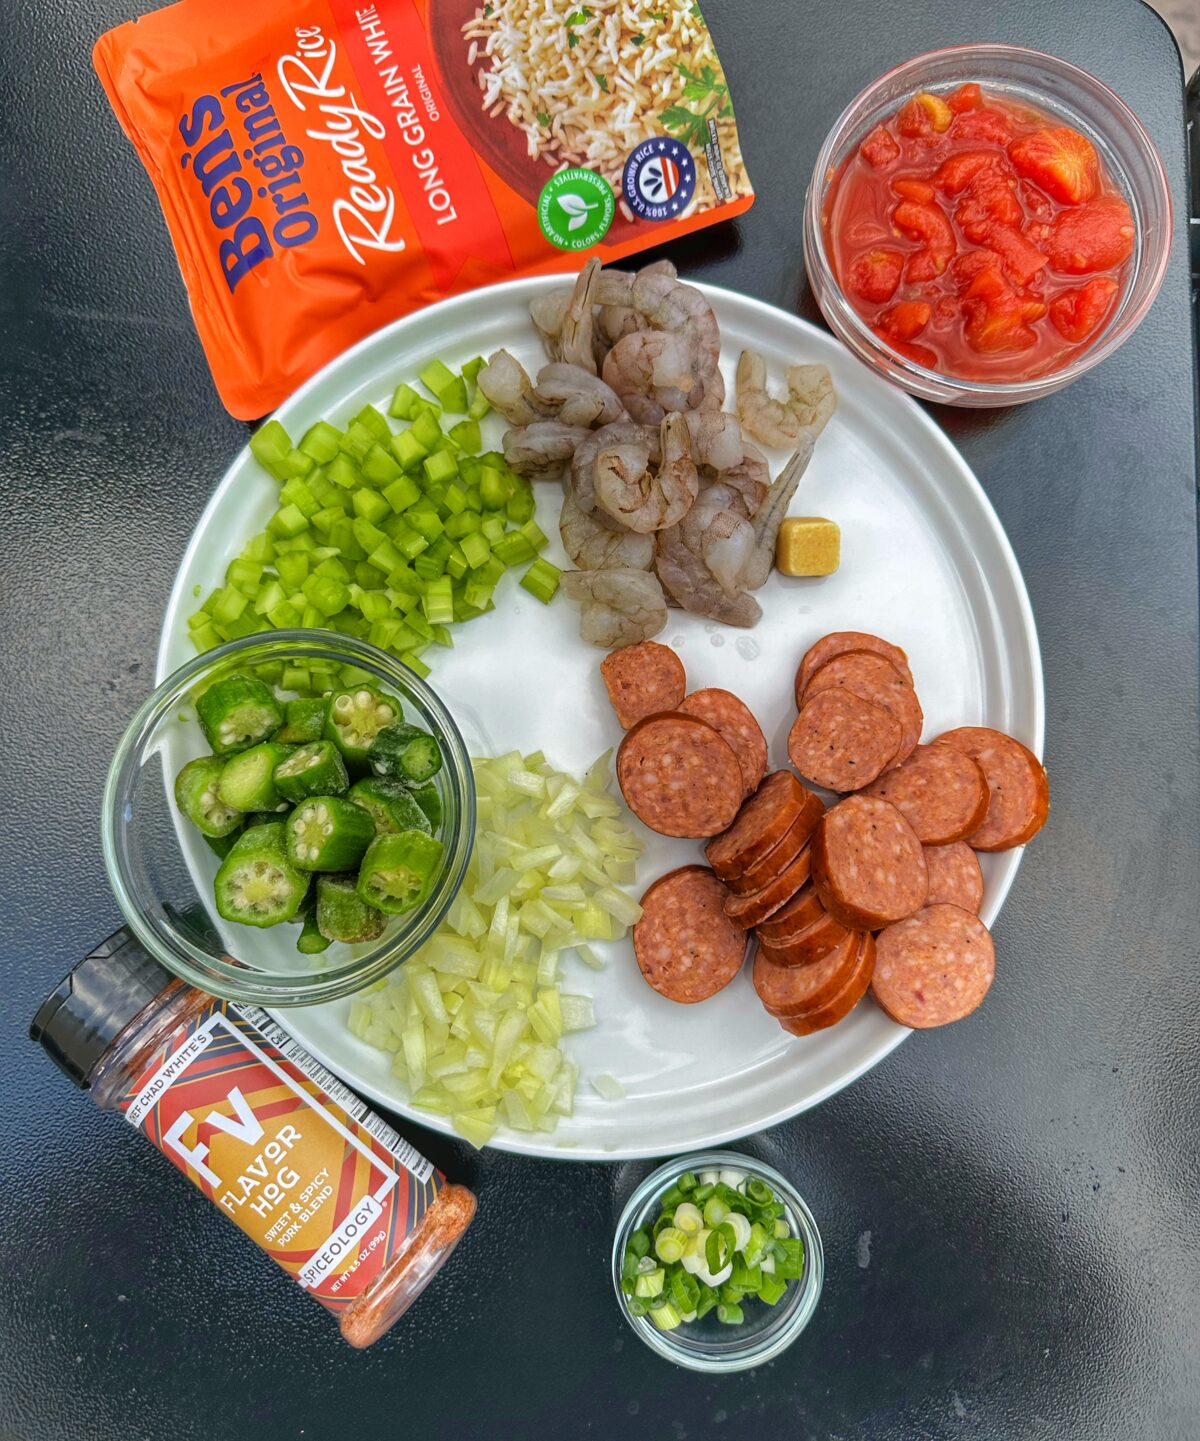 Ingredients for jambalaya on the Flatrock grill.